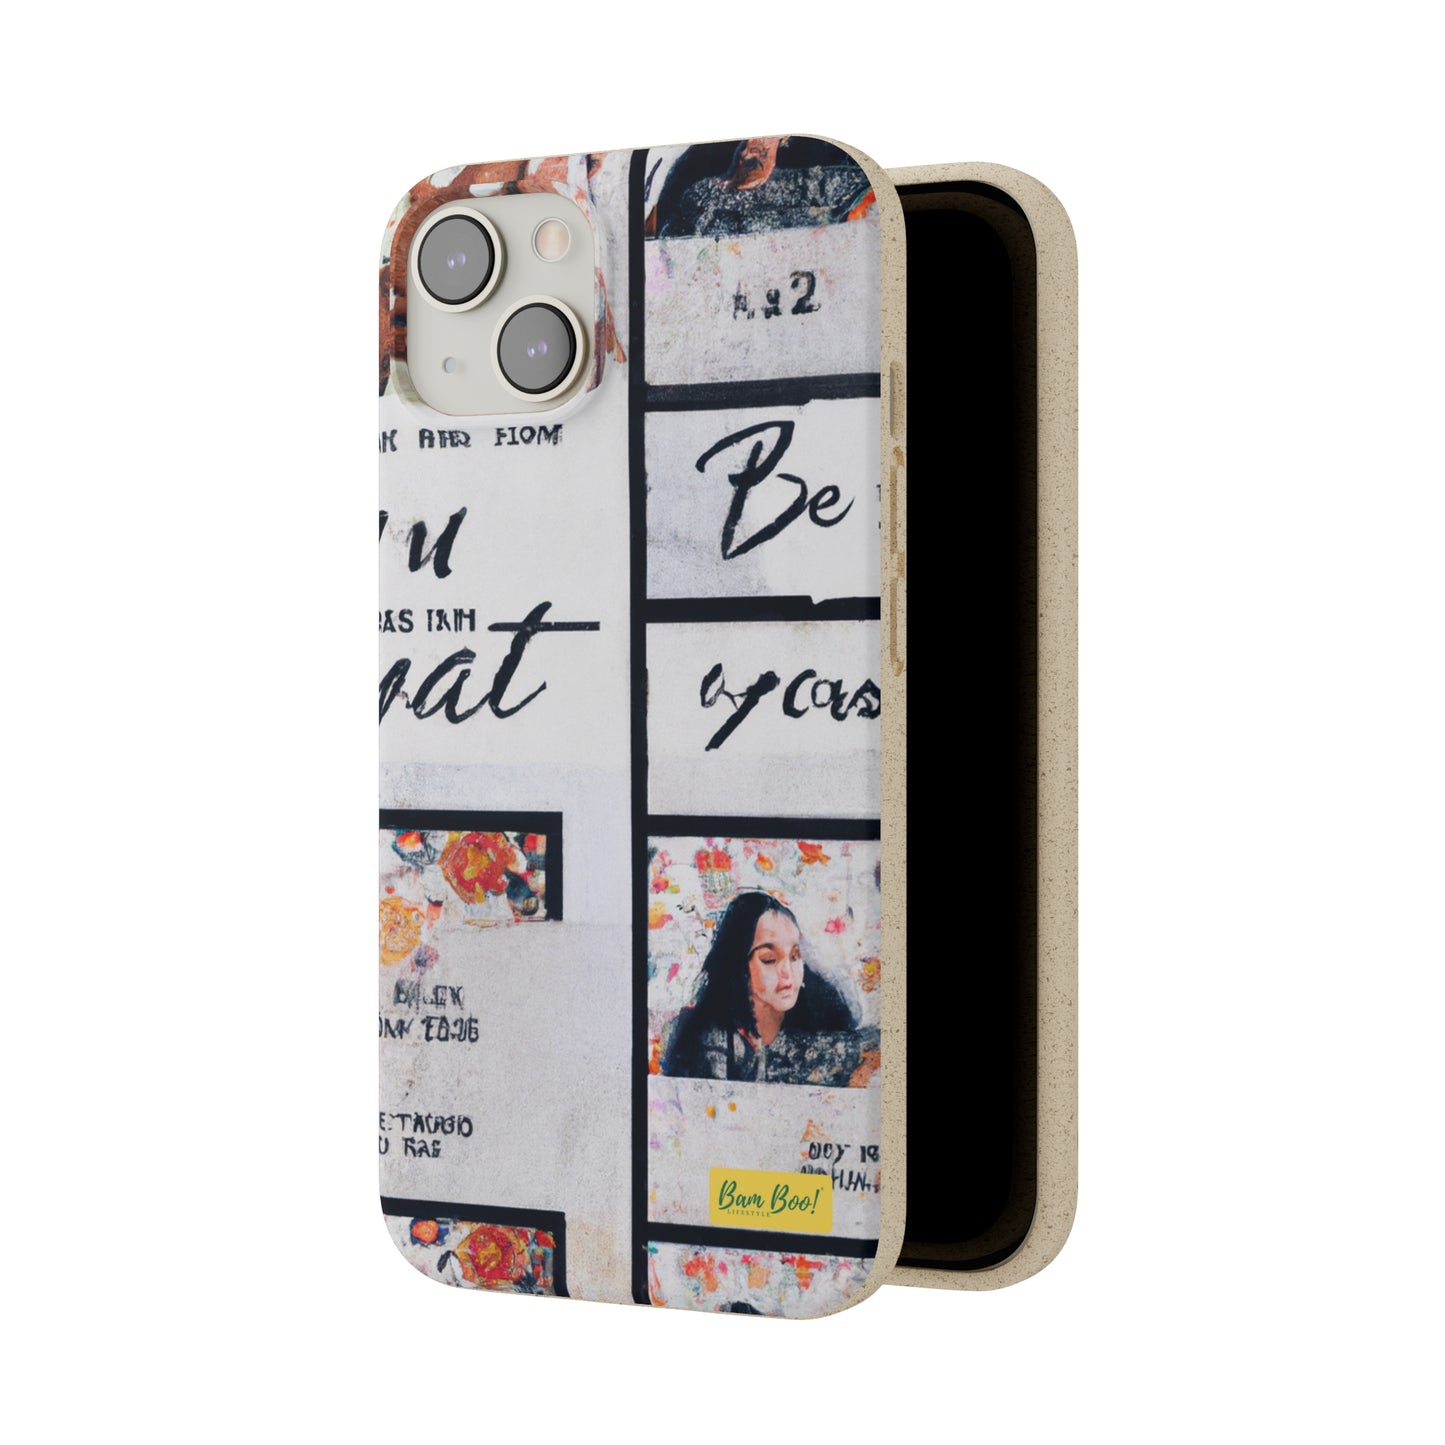 Reflections of the Past: A Visual Journey - Bam Boo! Lifestyle Eco-friendly Cases